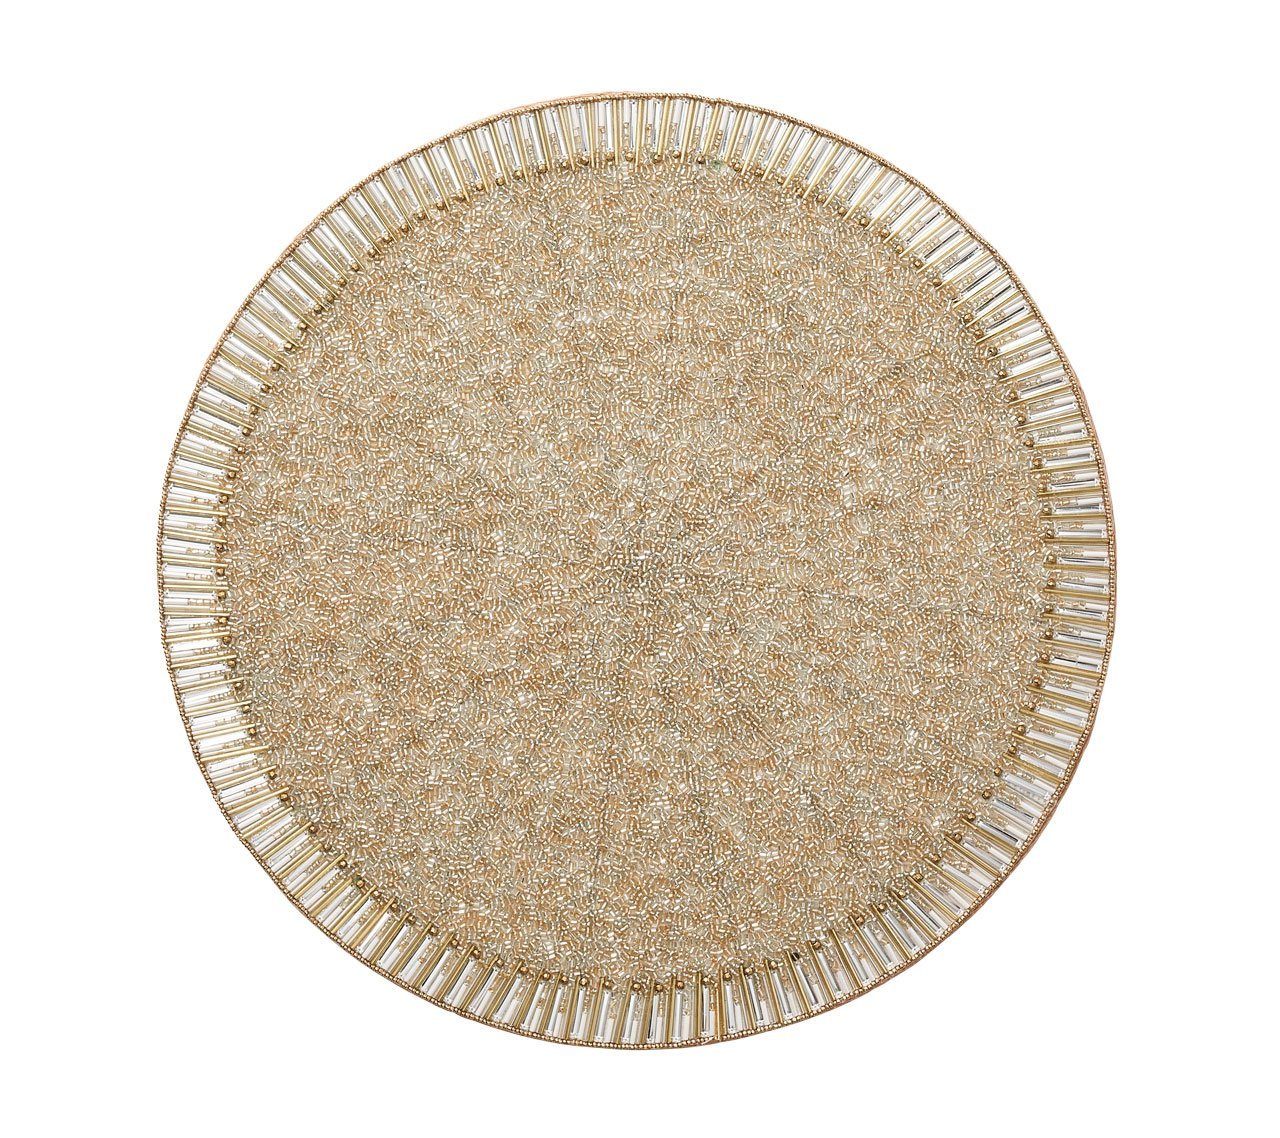 Round Bevel Placemat in gold & silver